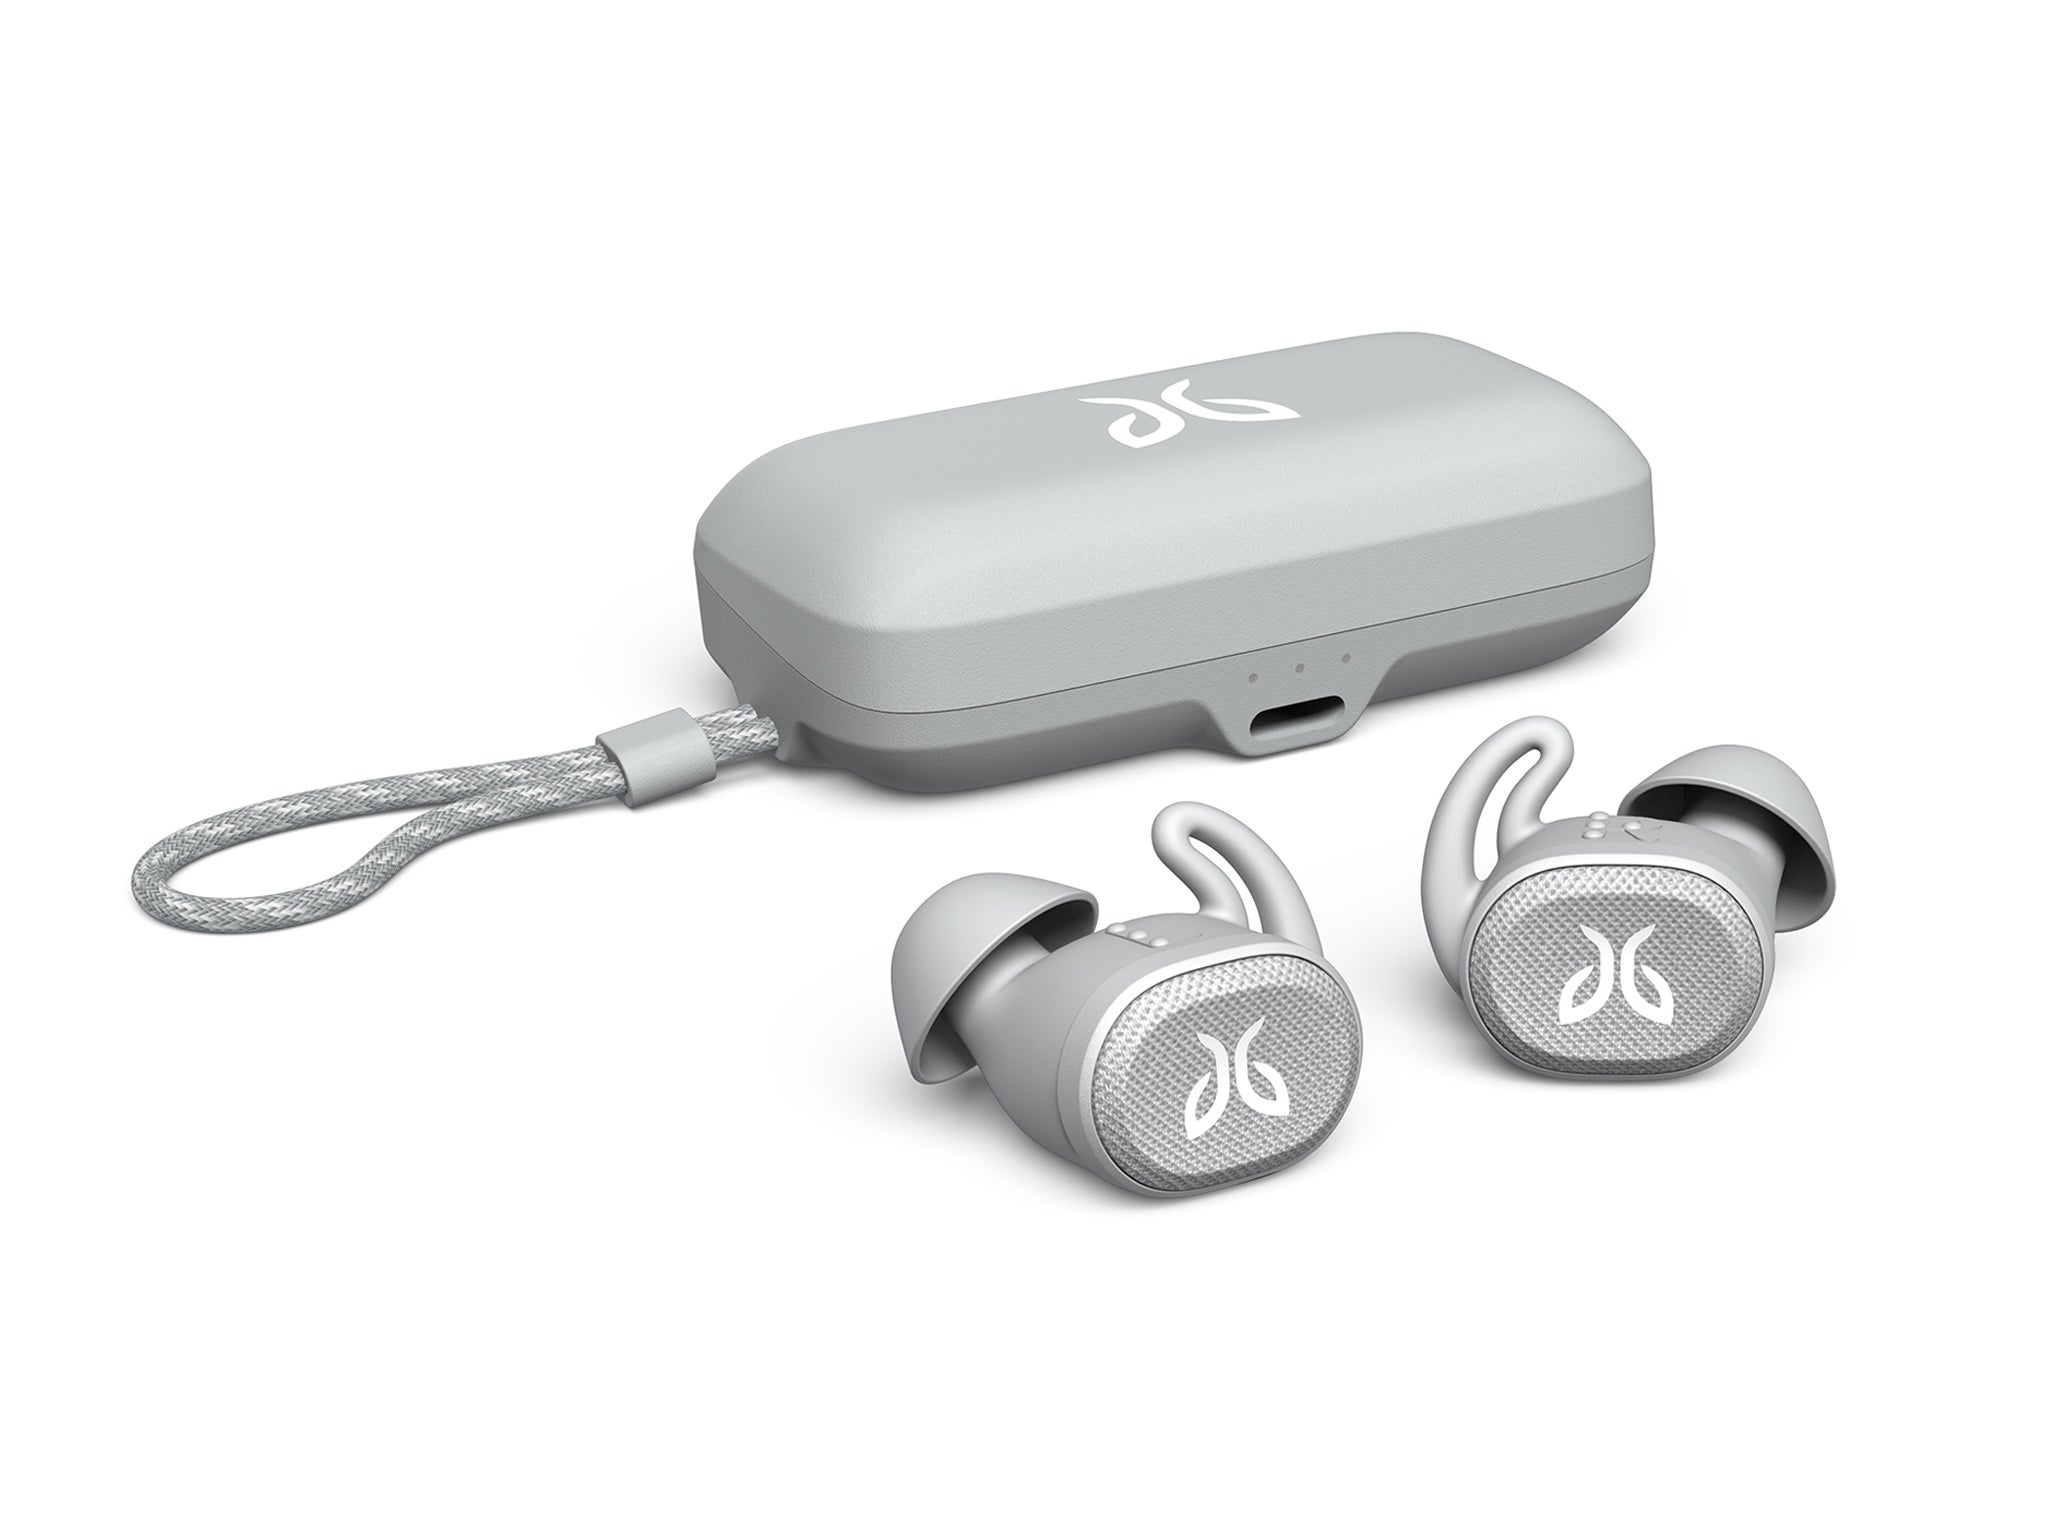 The 7 Best Wireless Earbuds For Running And Working Out - Winter